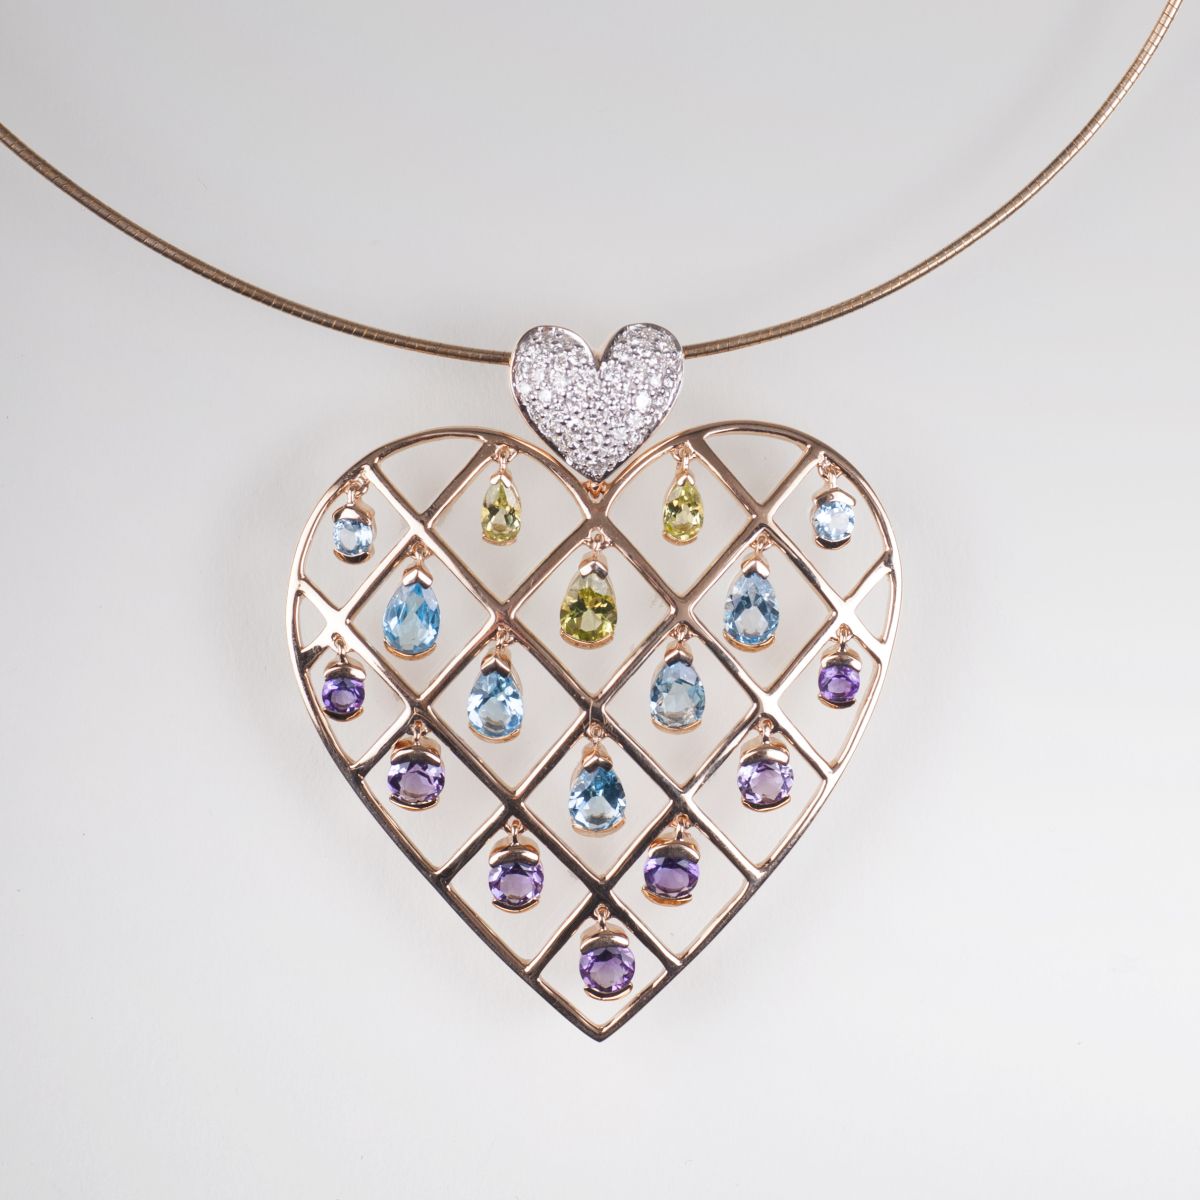 A heart pendant with colourful gemstone setting and necklace